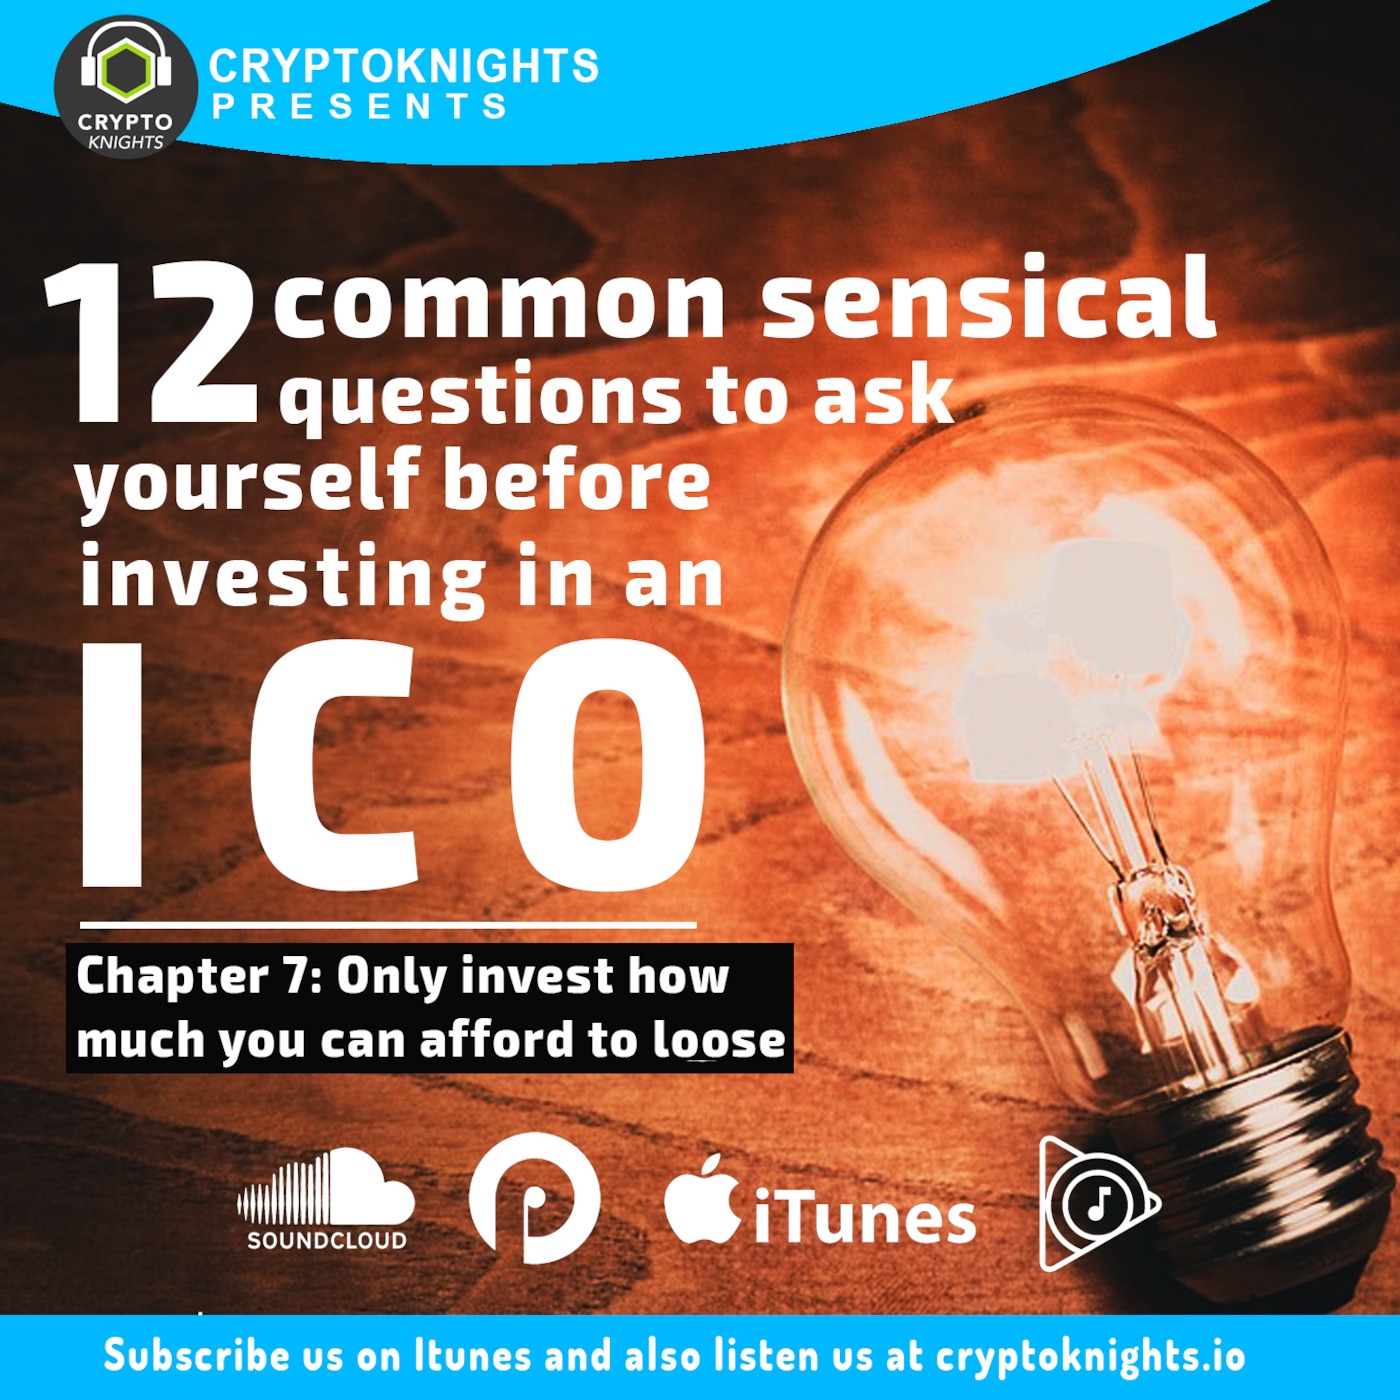 12 Common Sensical Questions to Ask Yourself Before Investing in an ICO.CHAPTER 7: ONLY INVEST HOW MUCH YOU CAN AFFORD TO LOOSE